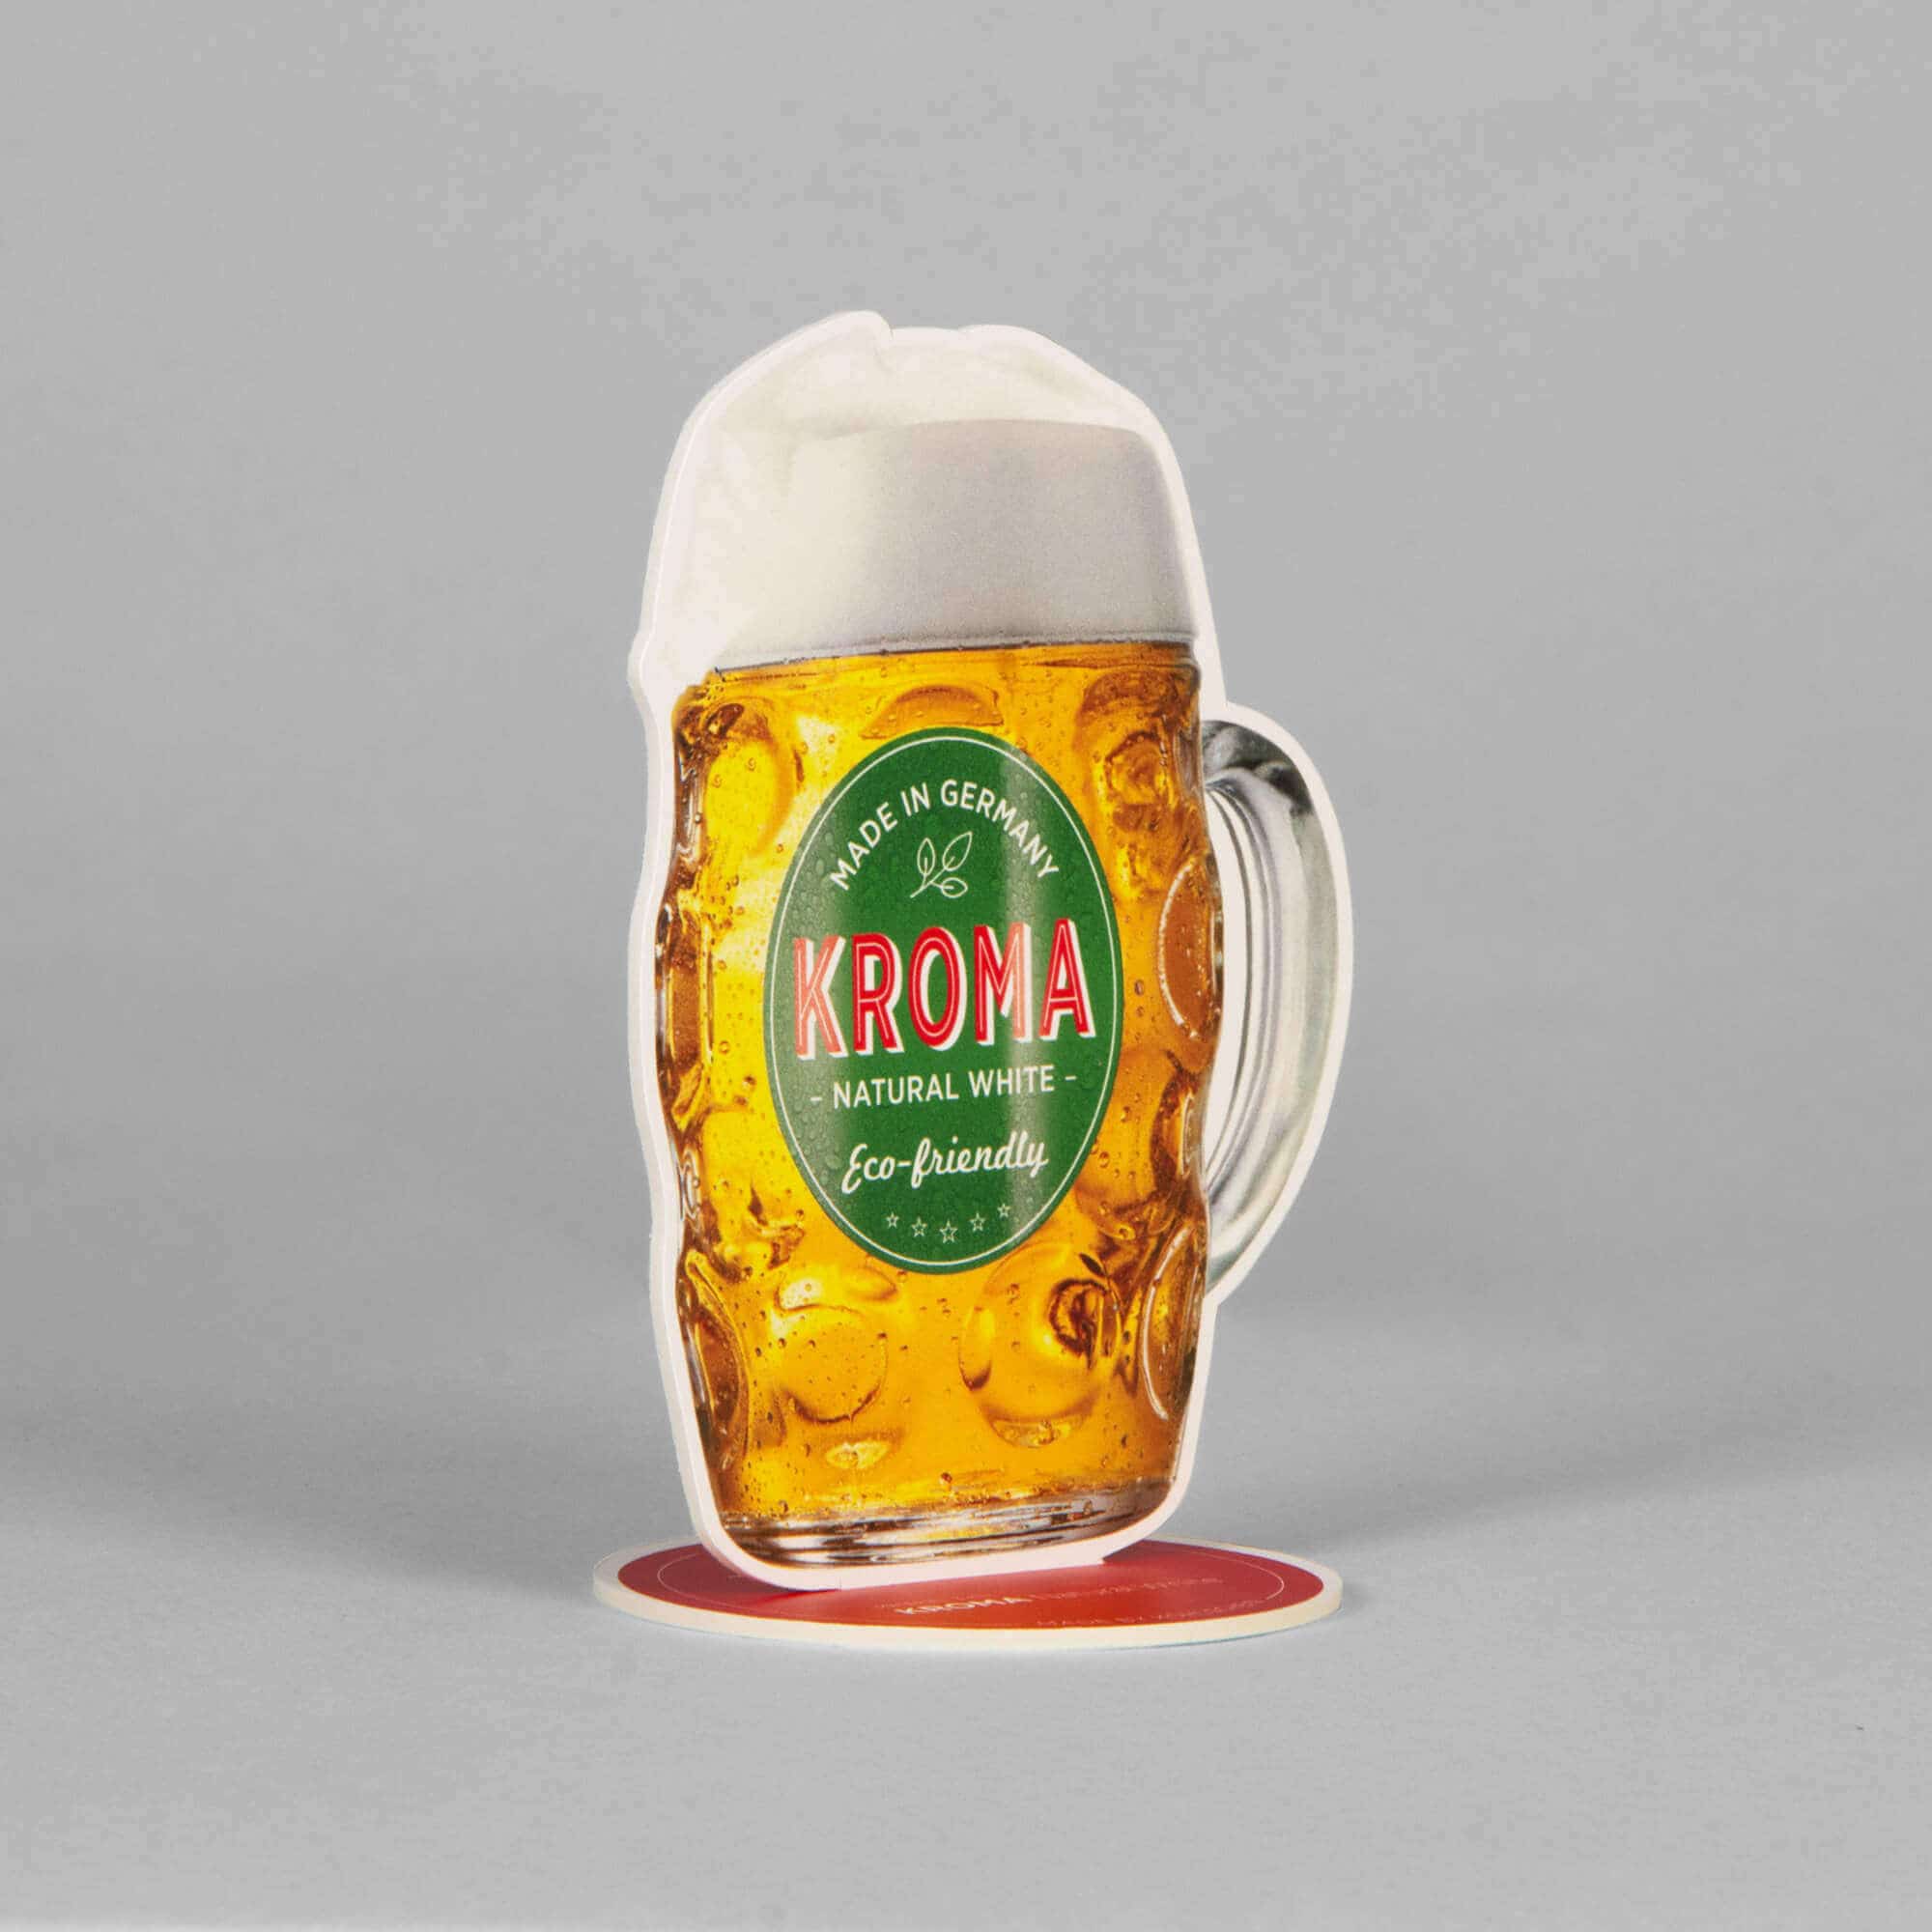 Display beer glass made of KROMA Natural White